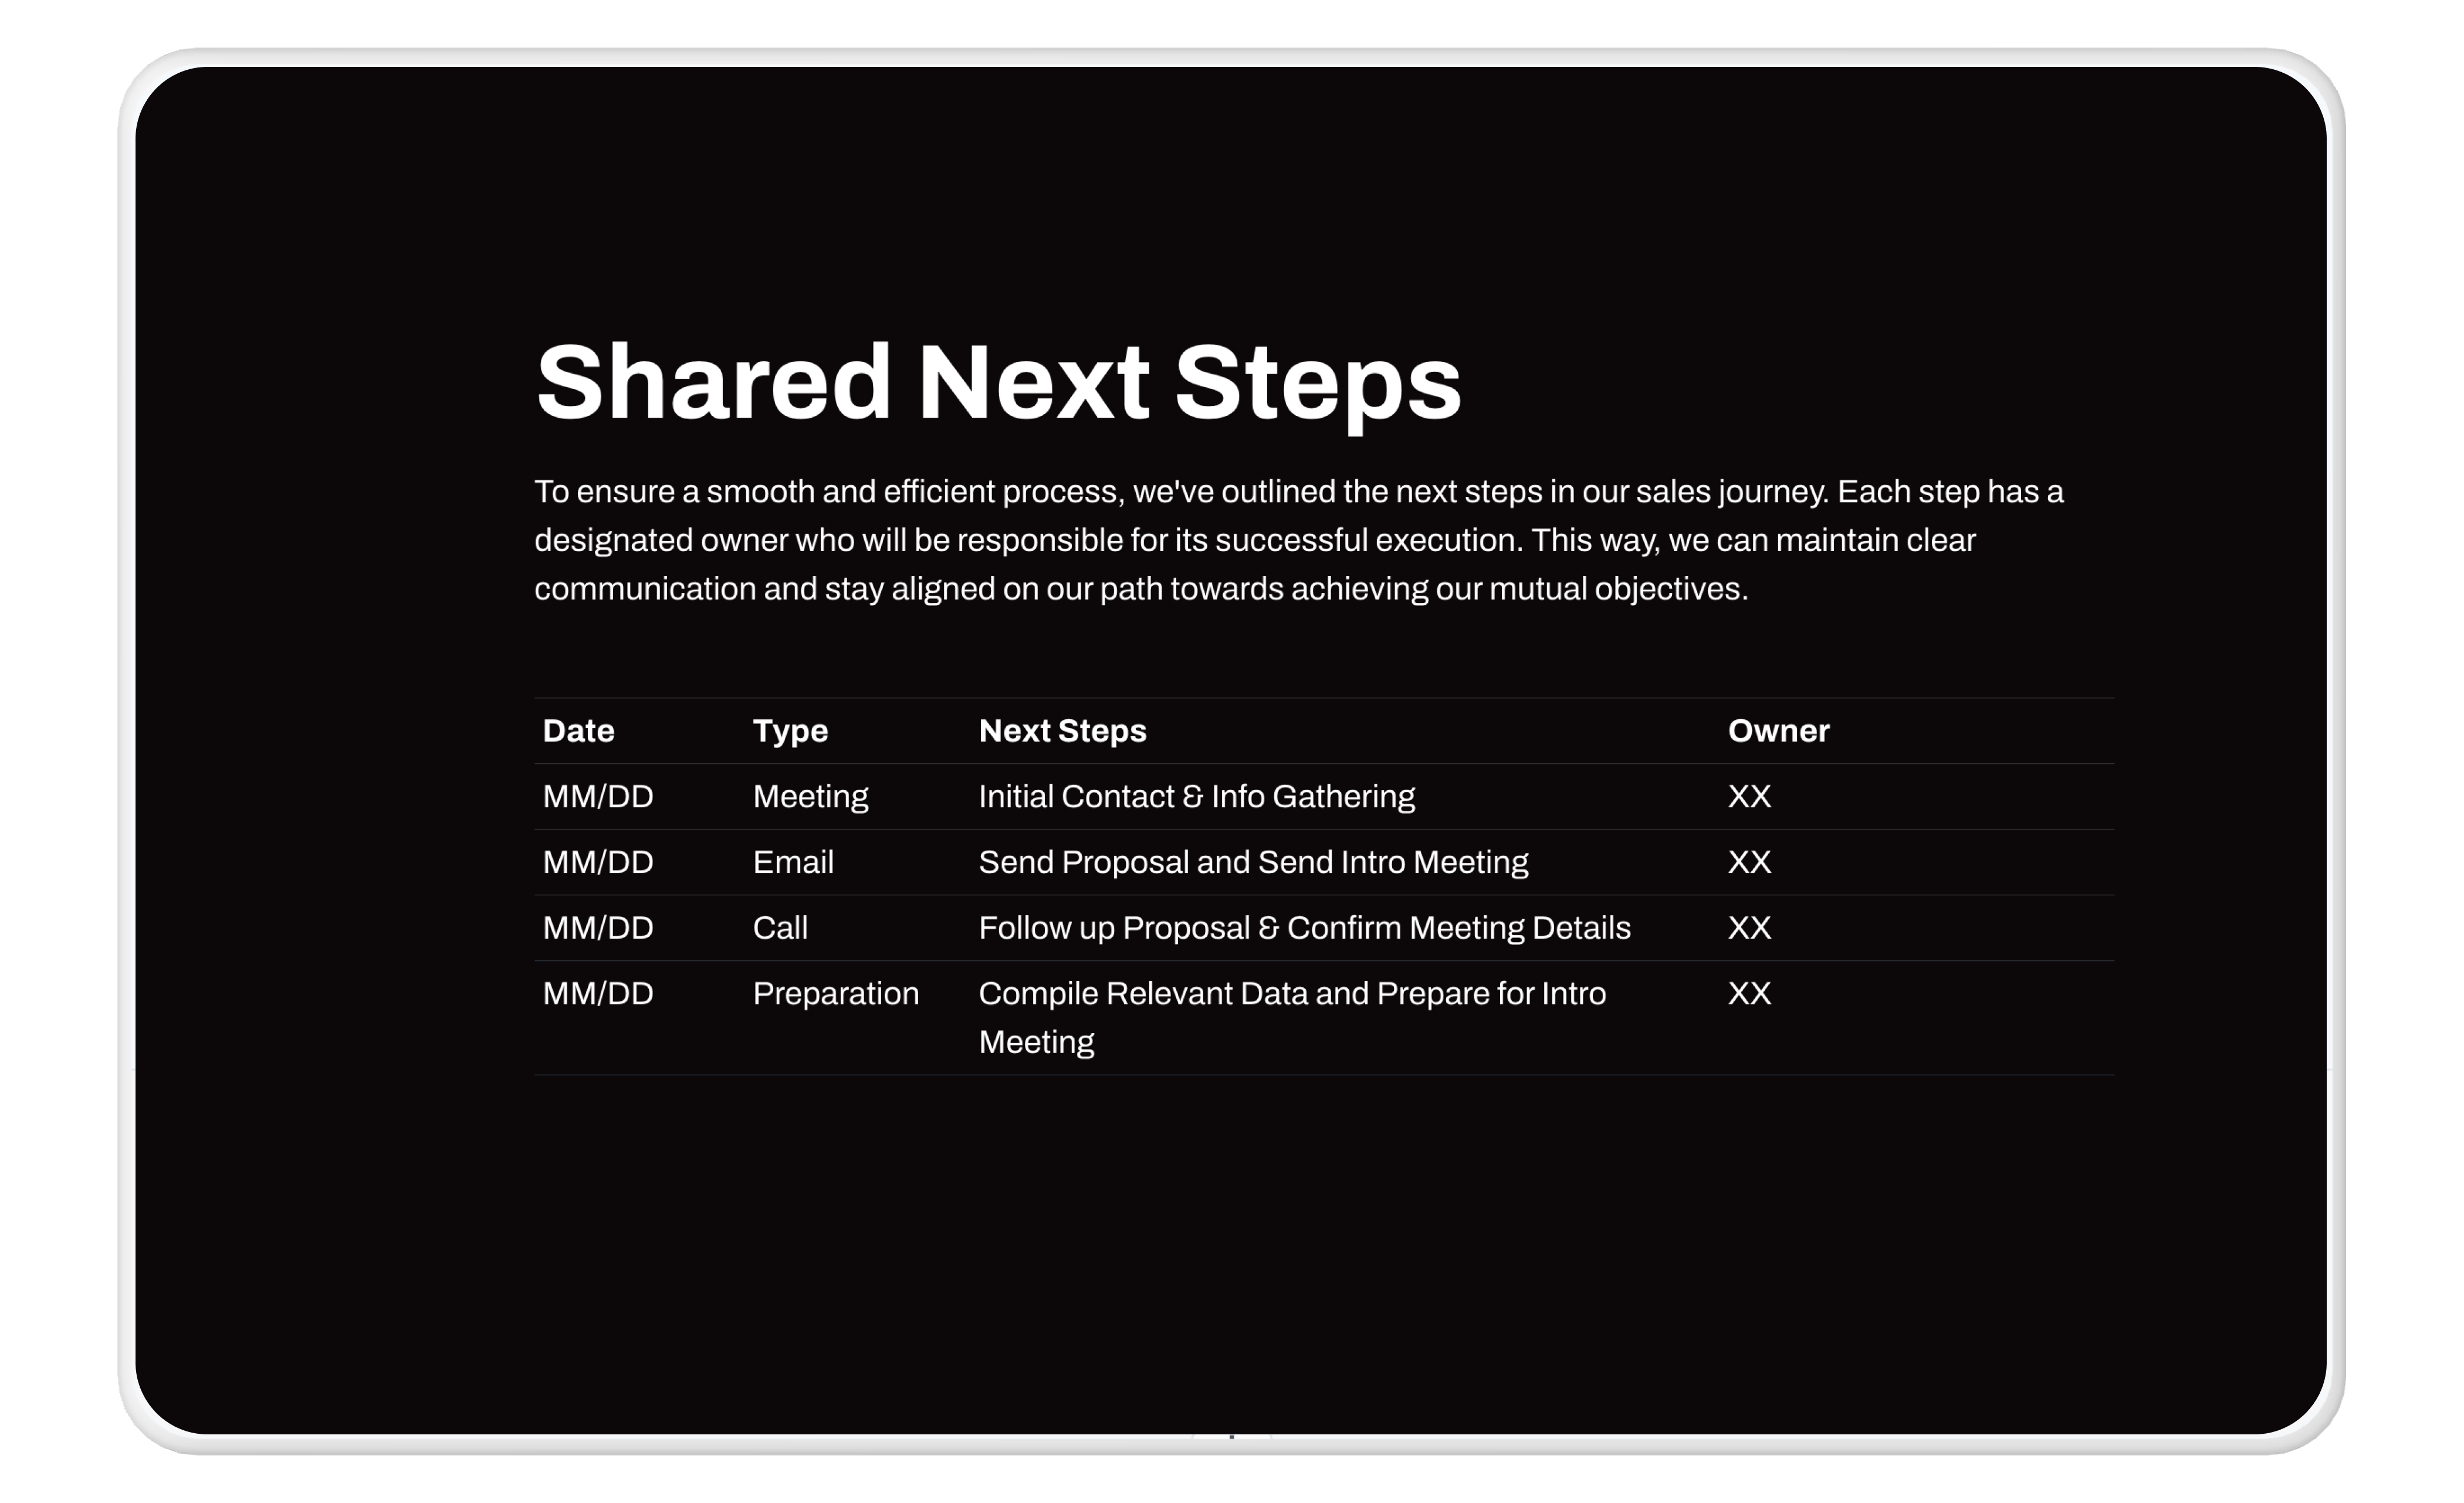 a shared next steps page with a list of next steps